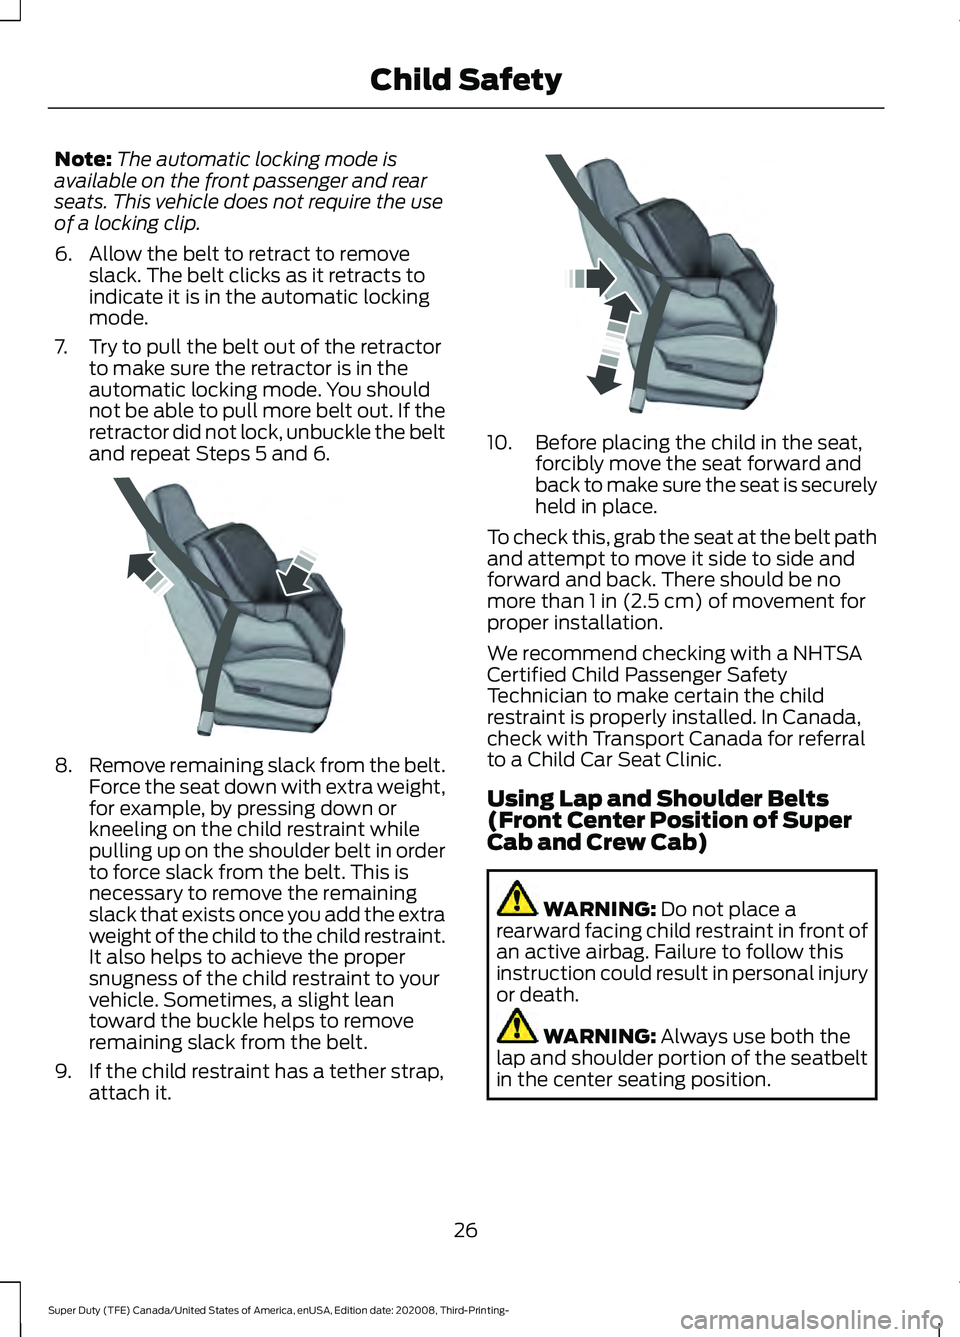 FORD F-250 2021  Owners Manual Note:
The automatic locking mode is
available on the front passenger and rear
seats. This vehicle does not require the use
of a locking clip.
6. Allow the belt to retract to remove slack. The belt cli